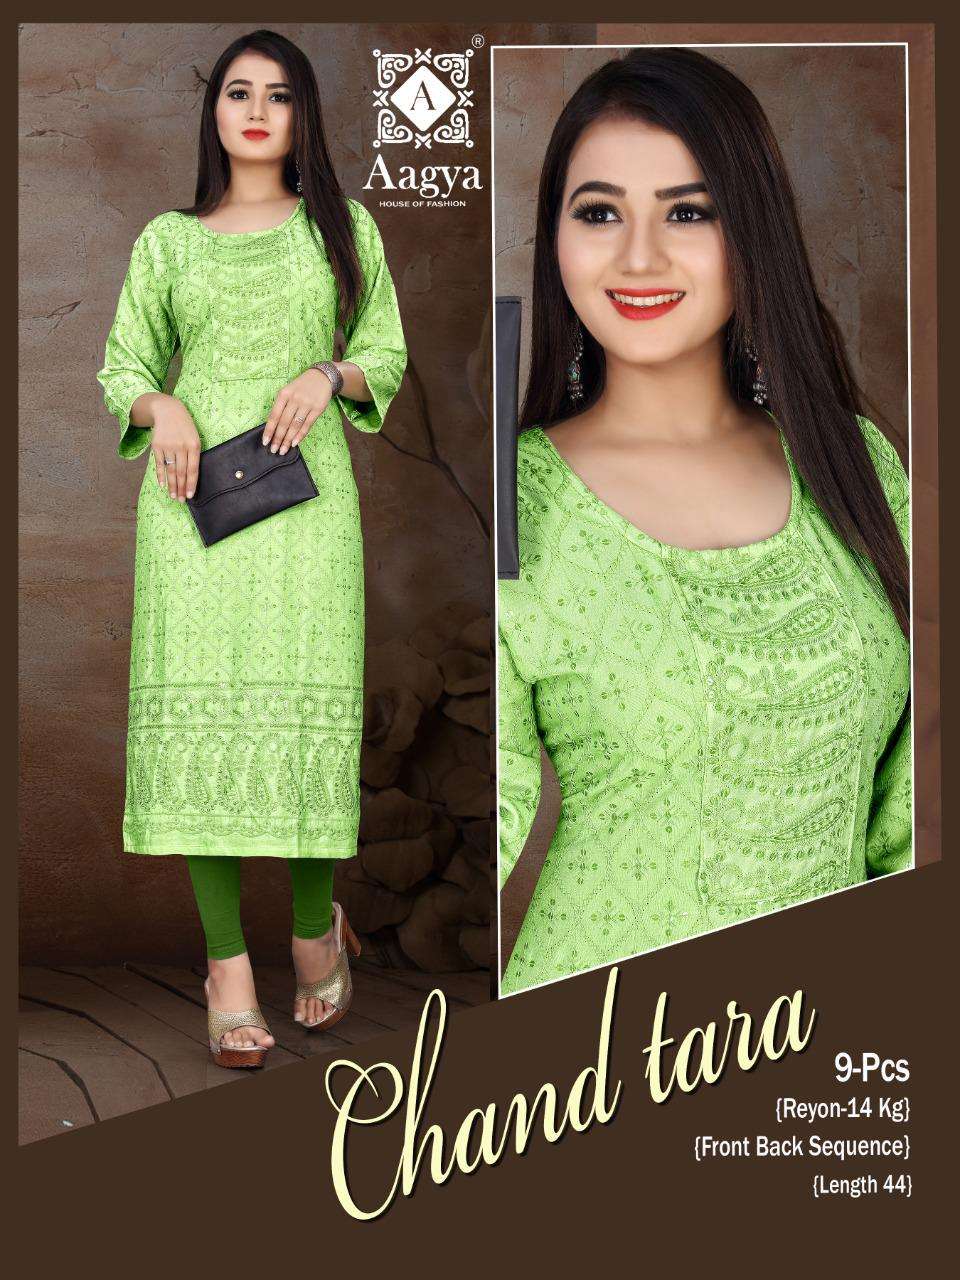 AAGYA Chand Tara HEAVY Sifli Sequence Rayon Front Back Sequence Work KURTI CATALOG WHOLESALER BEST RATE